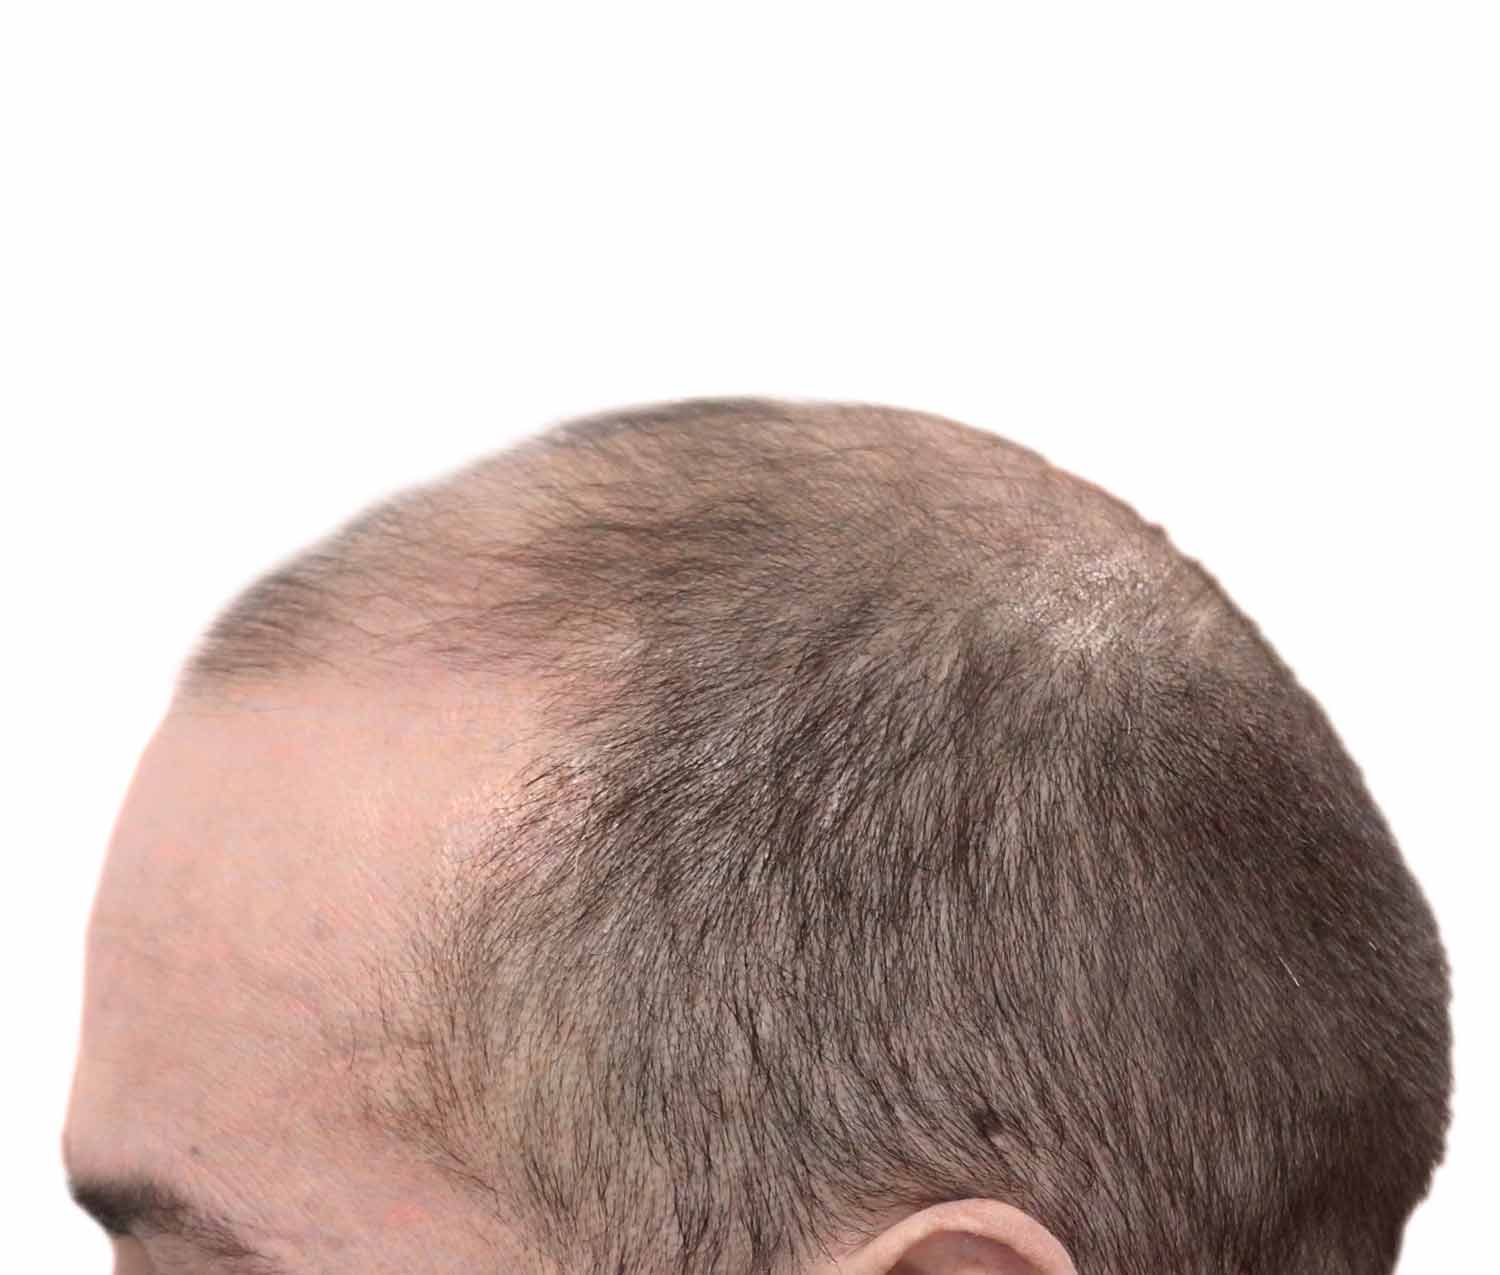 a close up of a man 's head with a bald head .